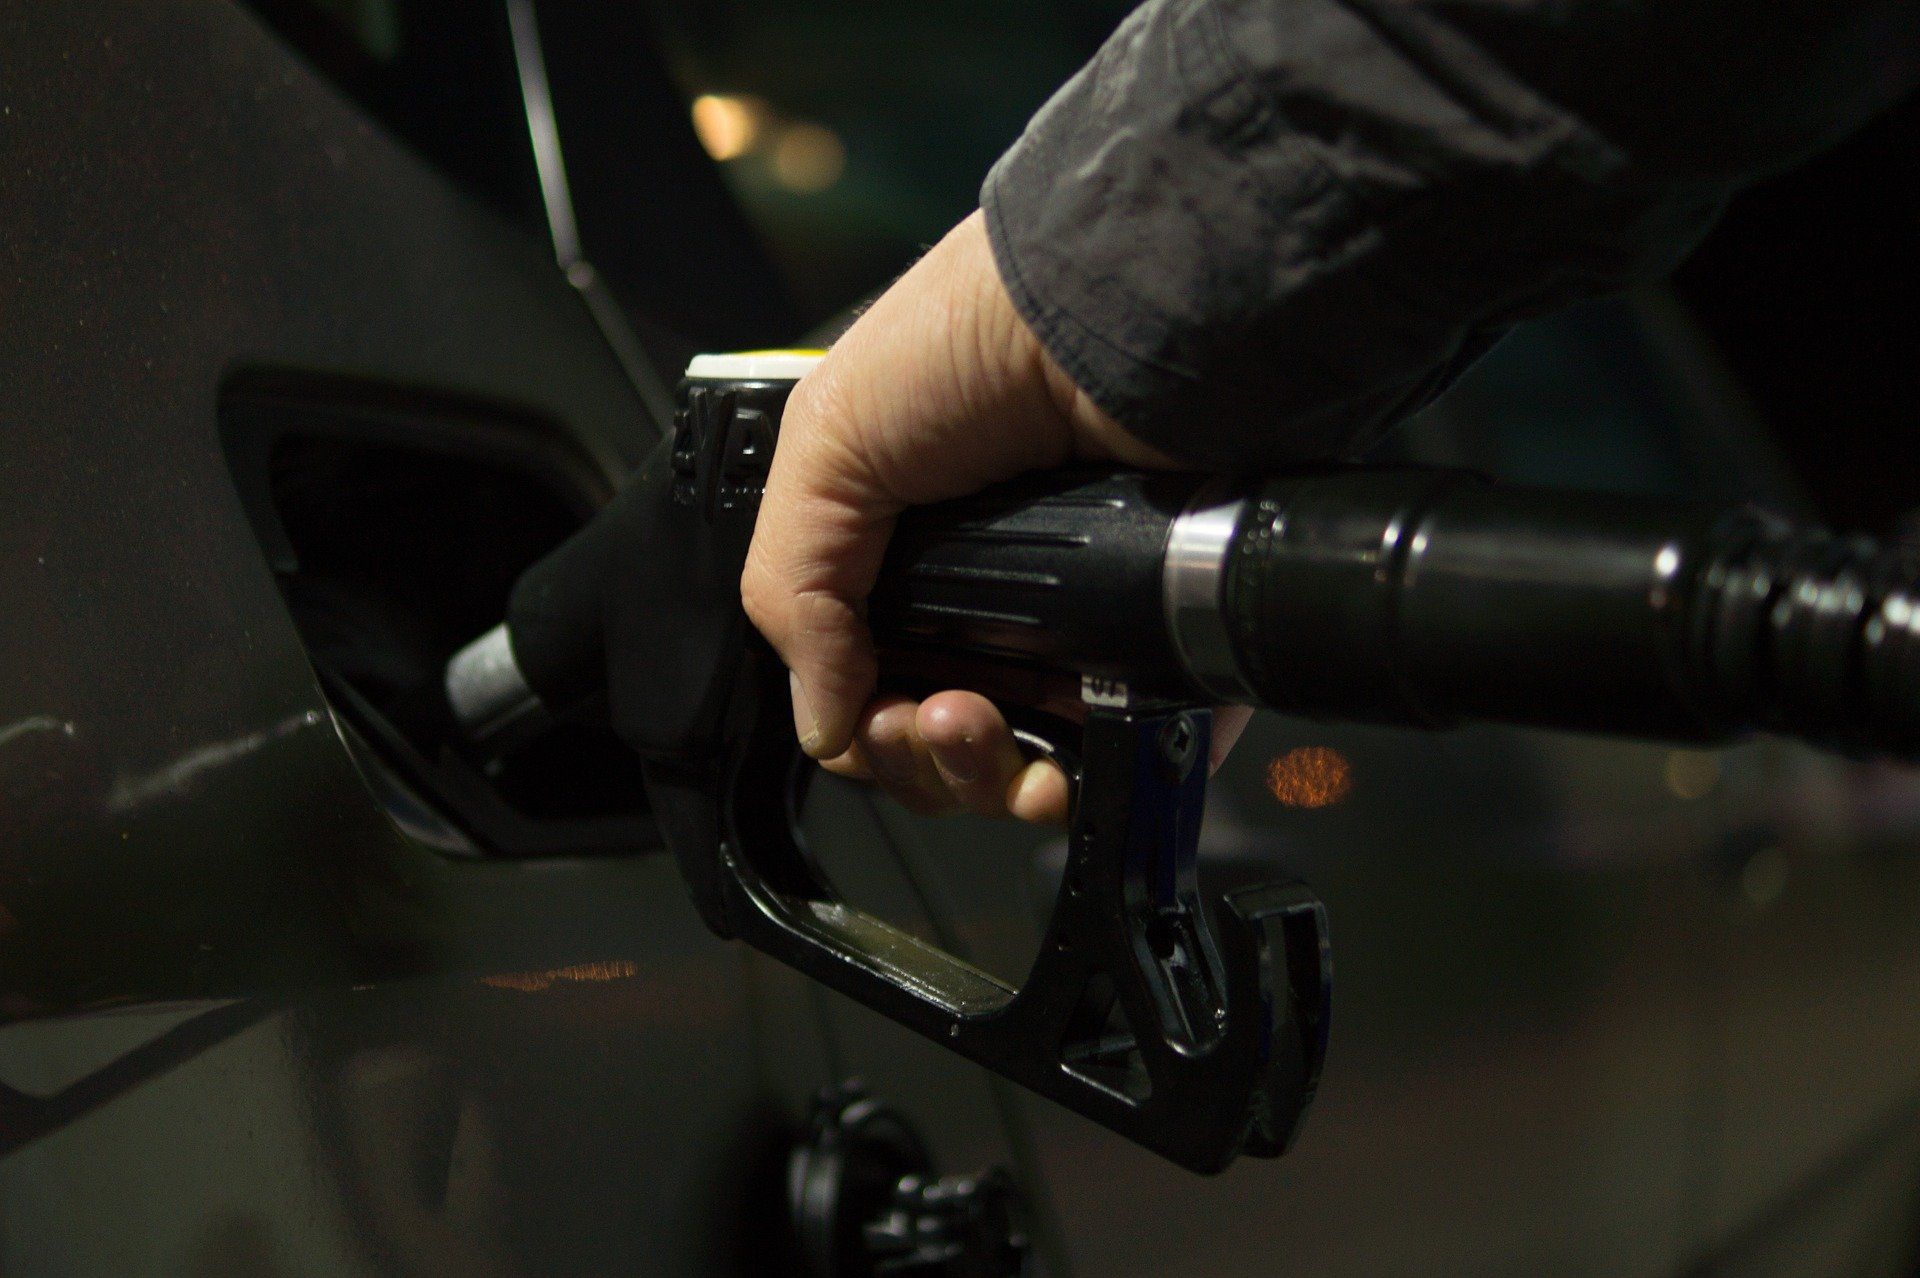 Fuel prices: Petrol priced at Rs 95.41, diesel Rs 86.67 in Delhi on March 8, 2022